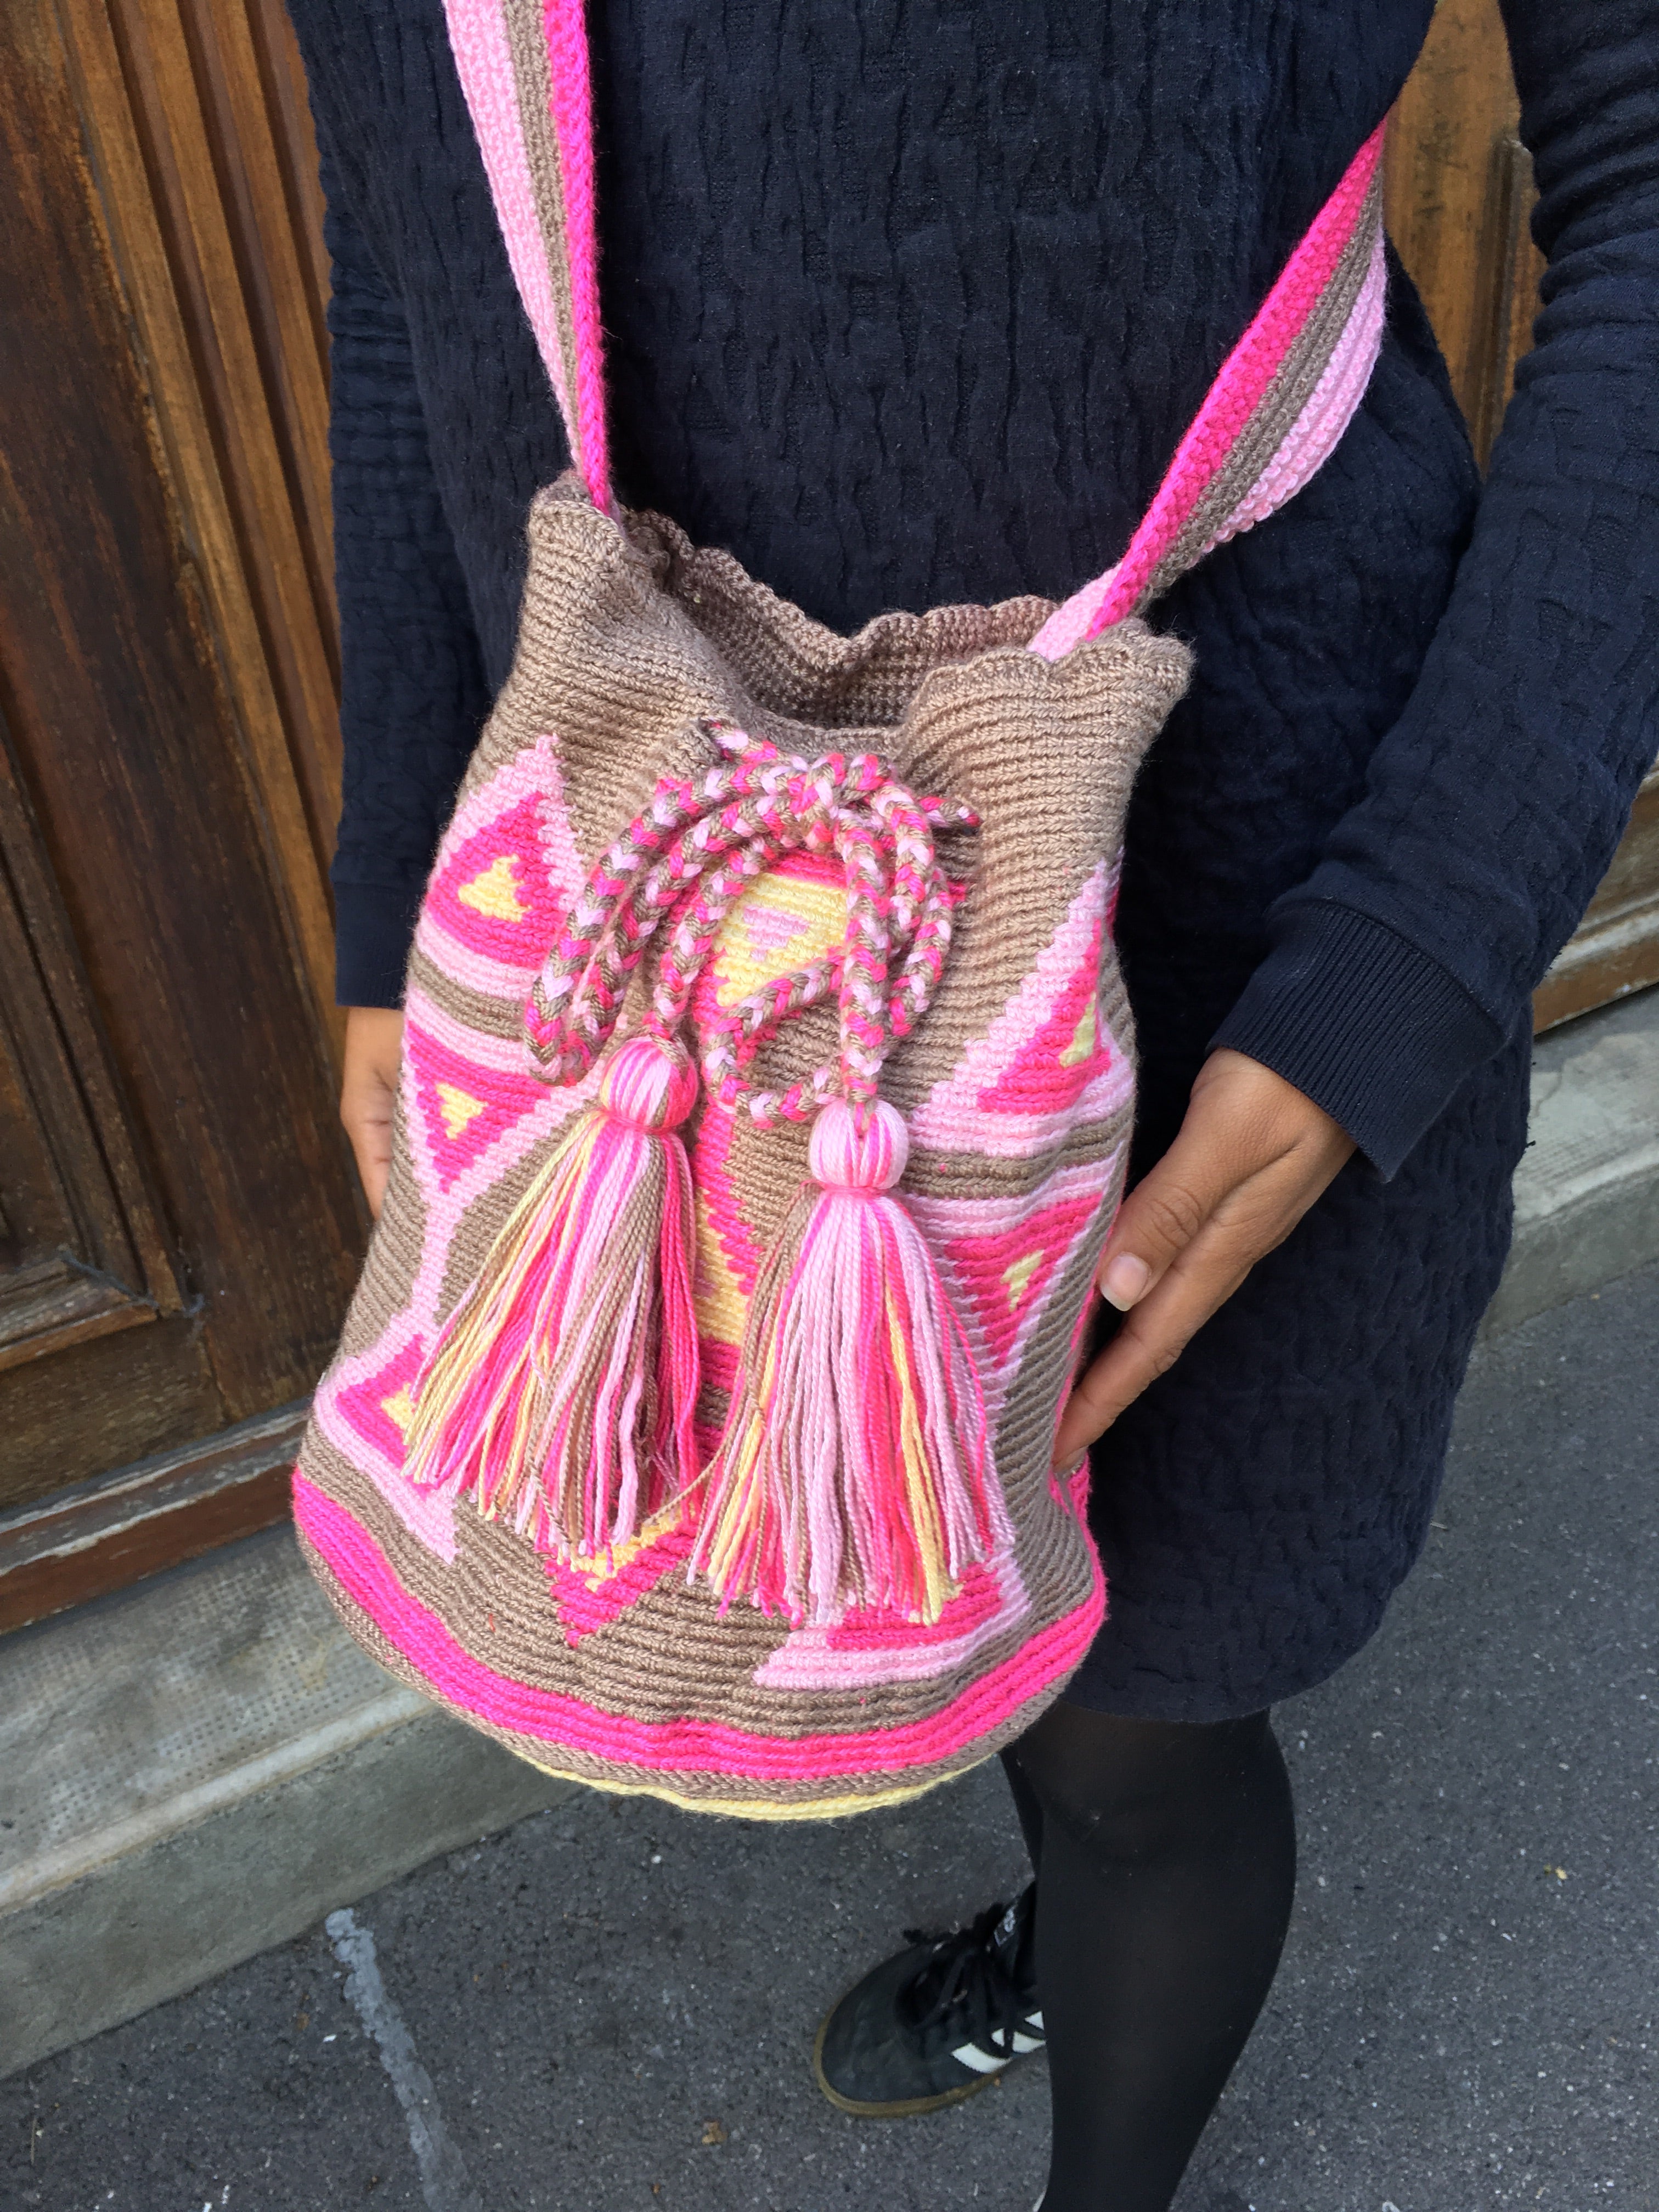 Pompom bag, yellow and pink triangle pattern